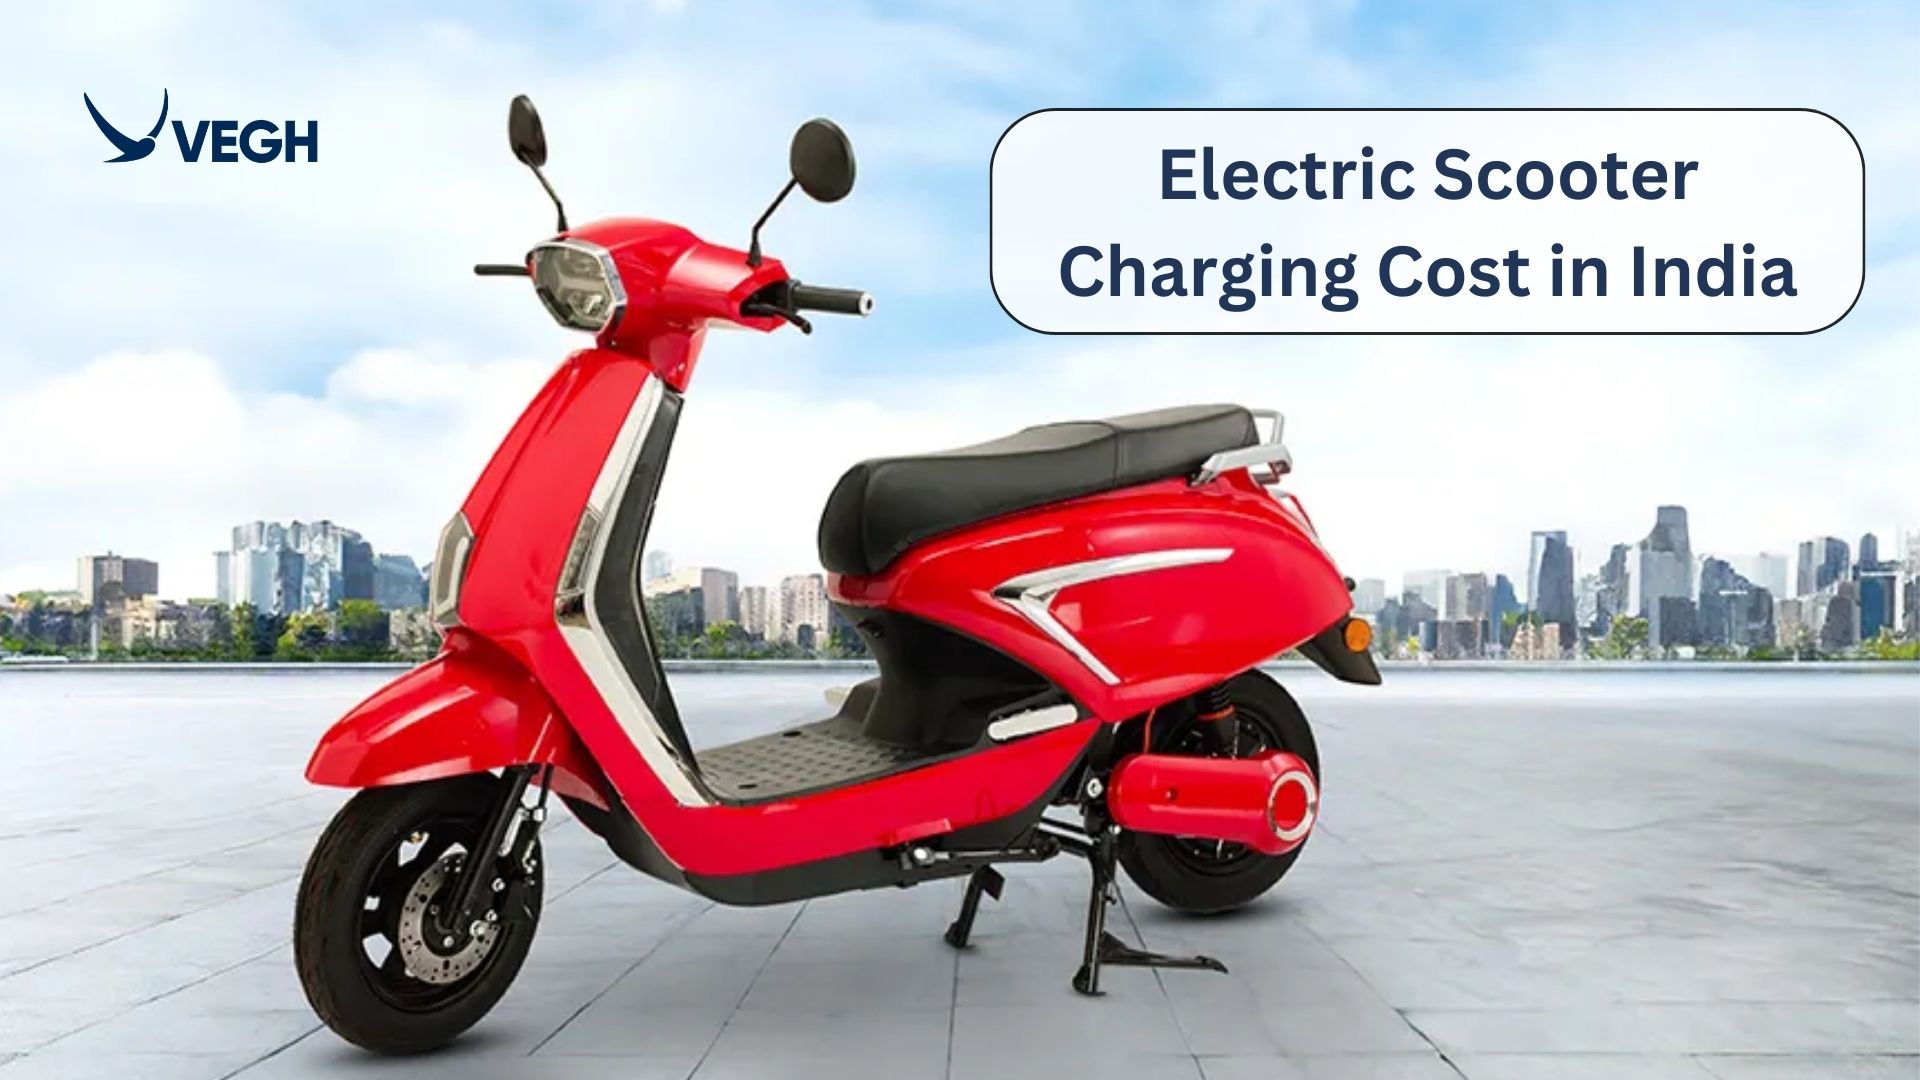 Electric Scooter Charging Cost in India